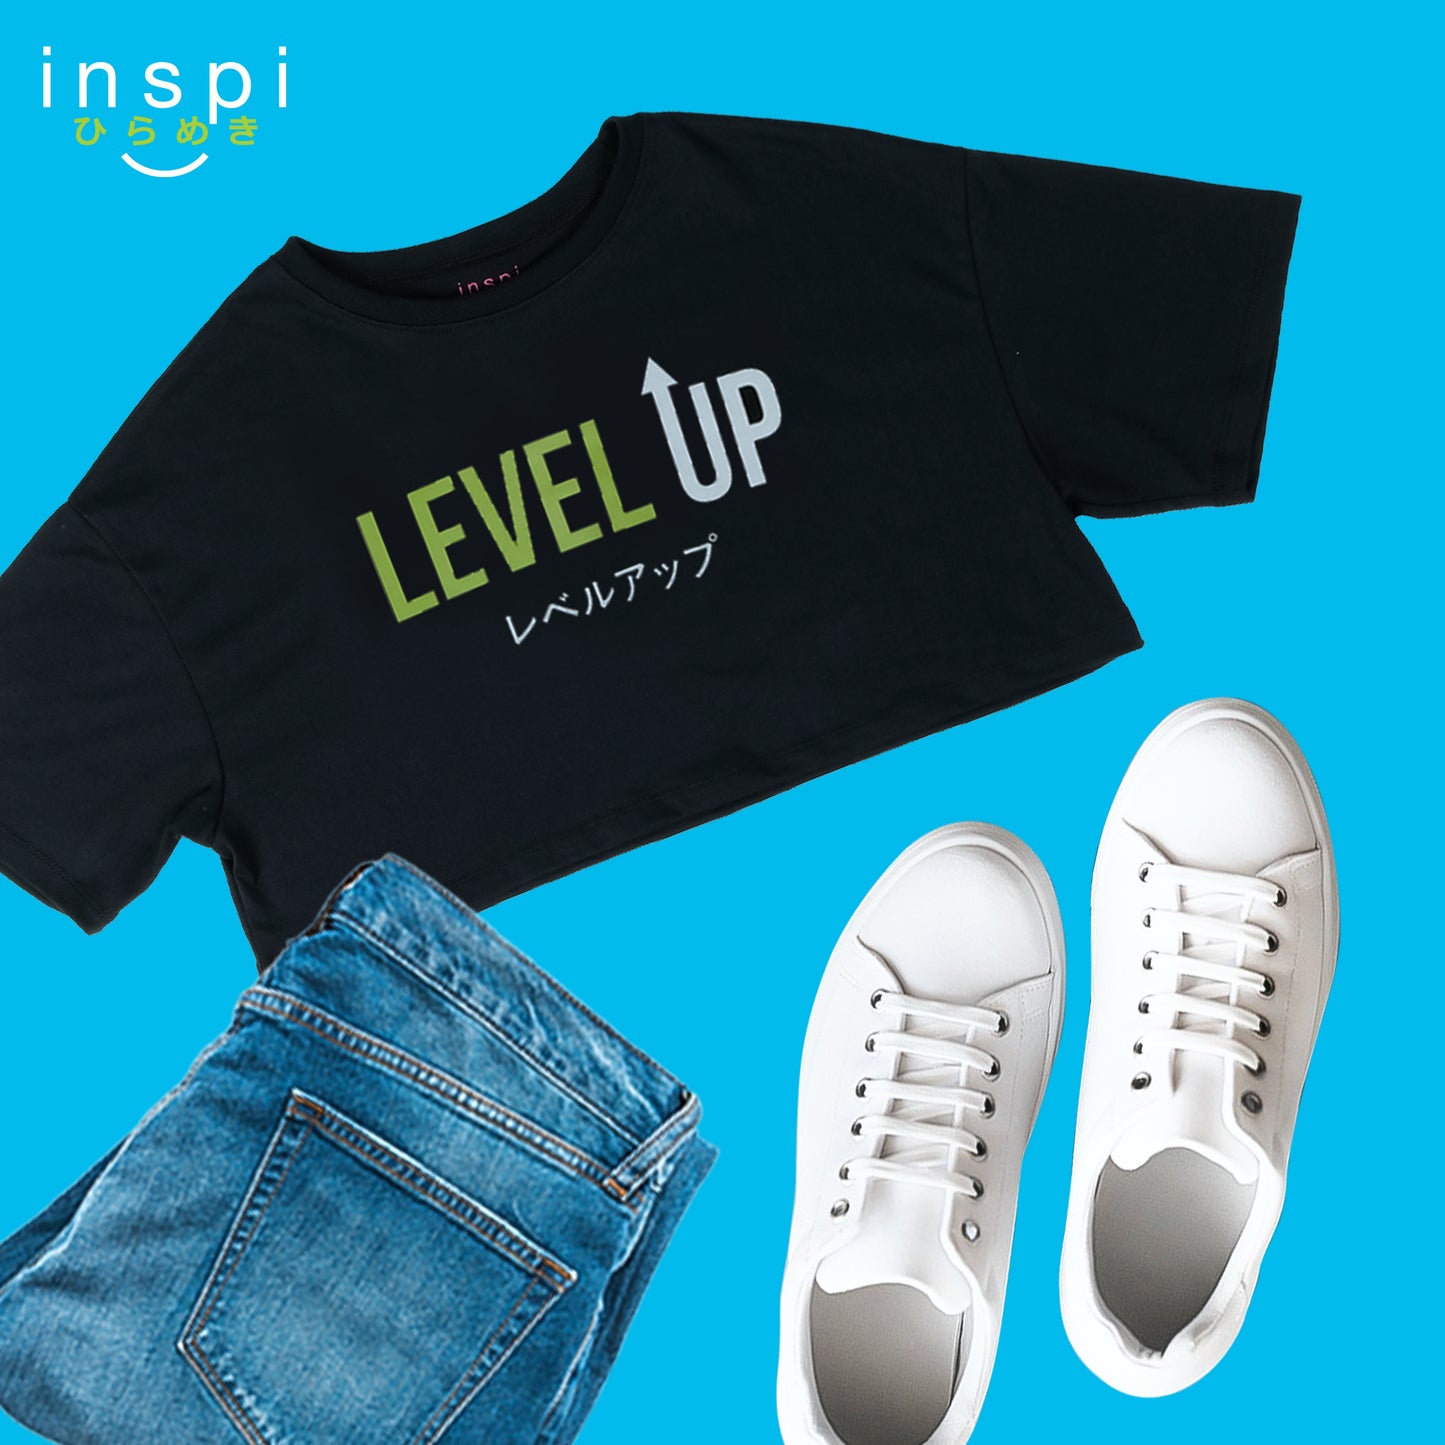 INSPI Oversized Crop Top Level Up Graphic Tshirt